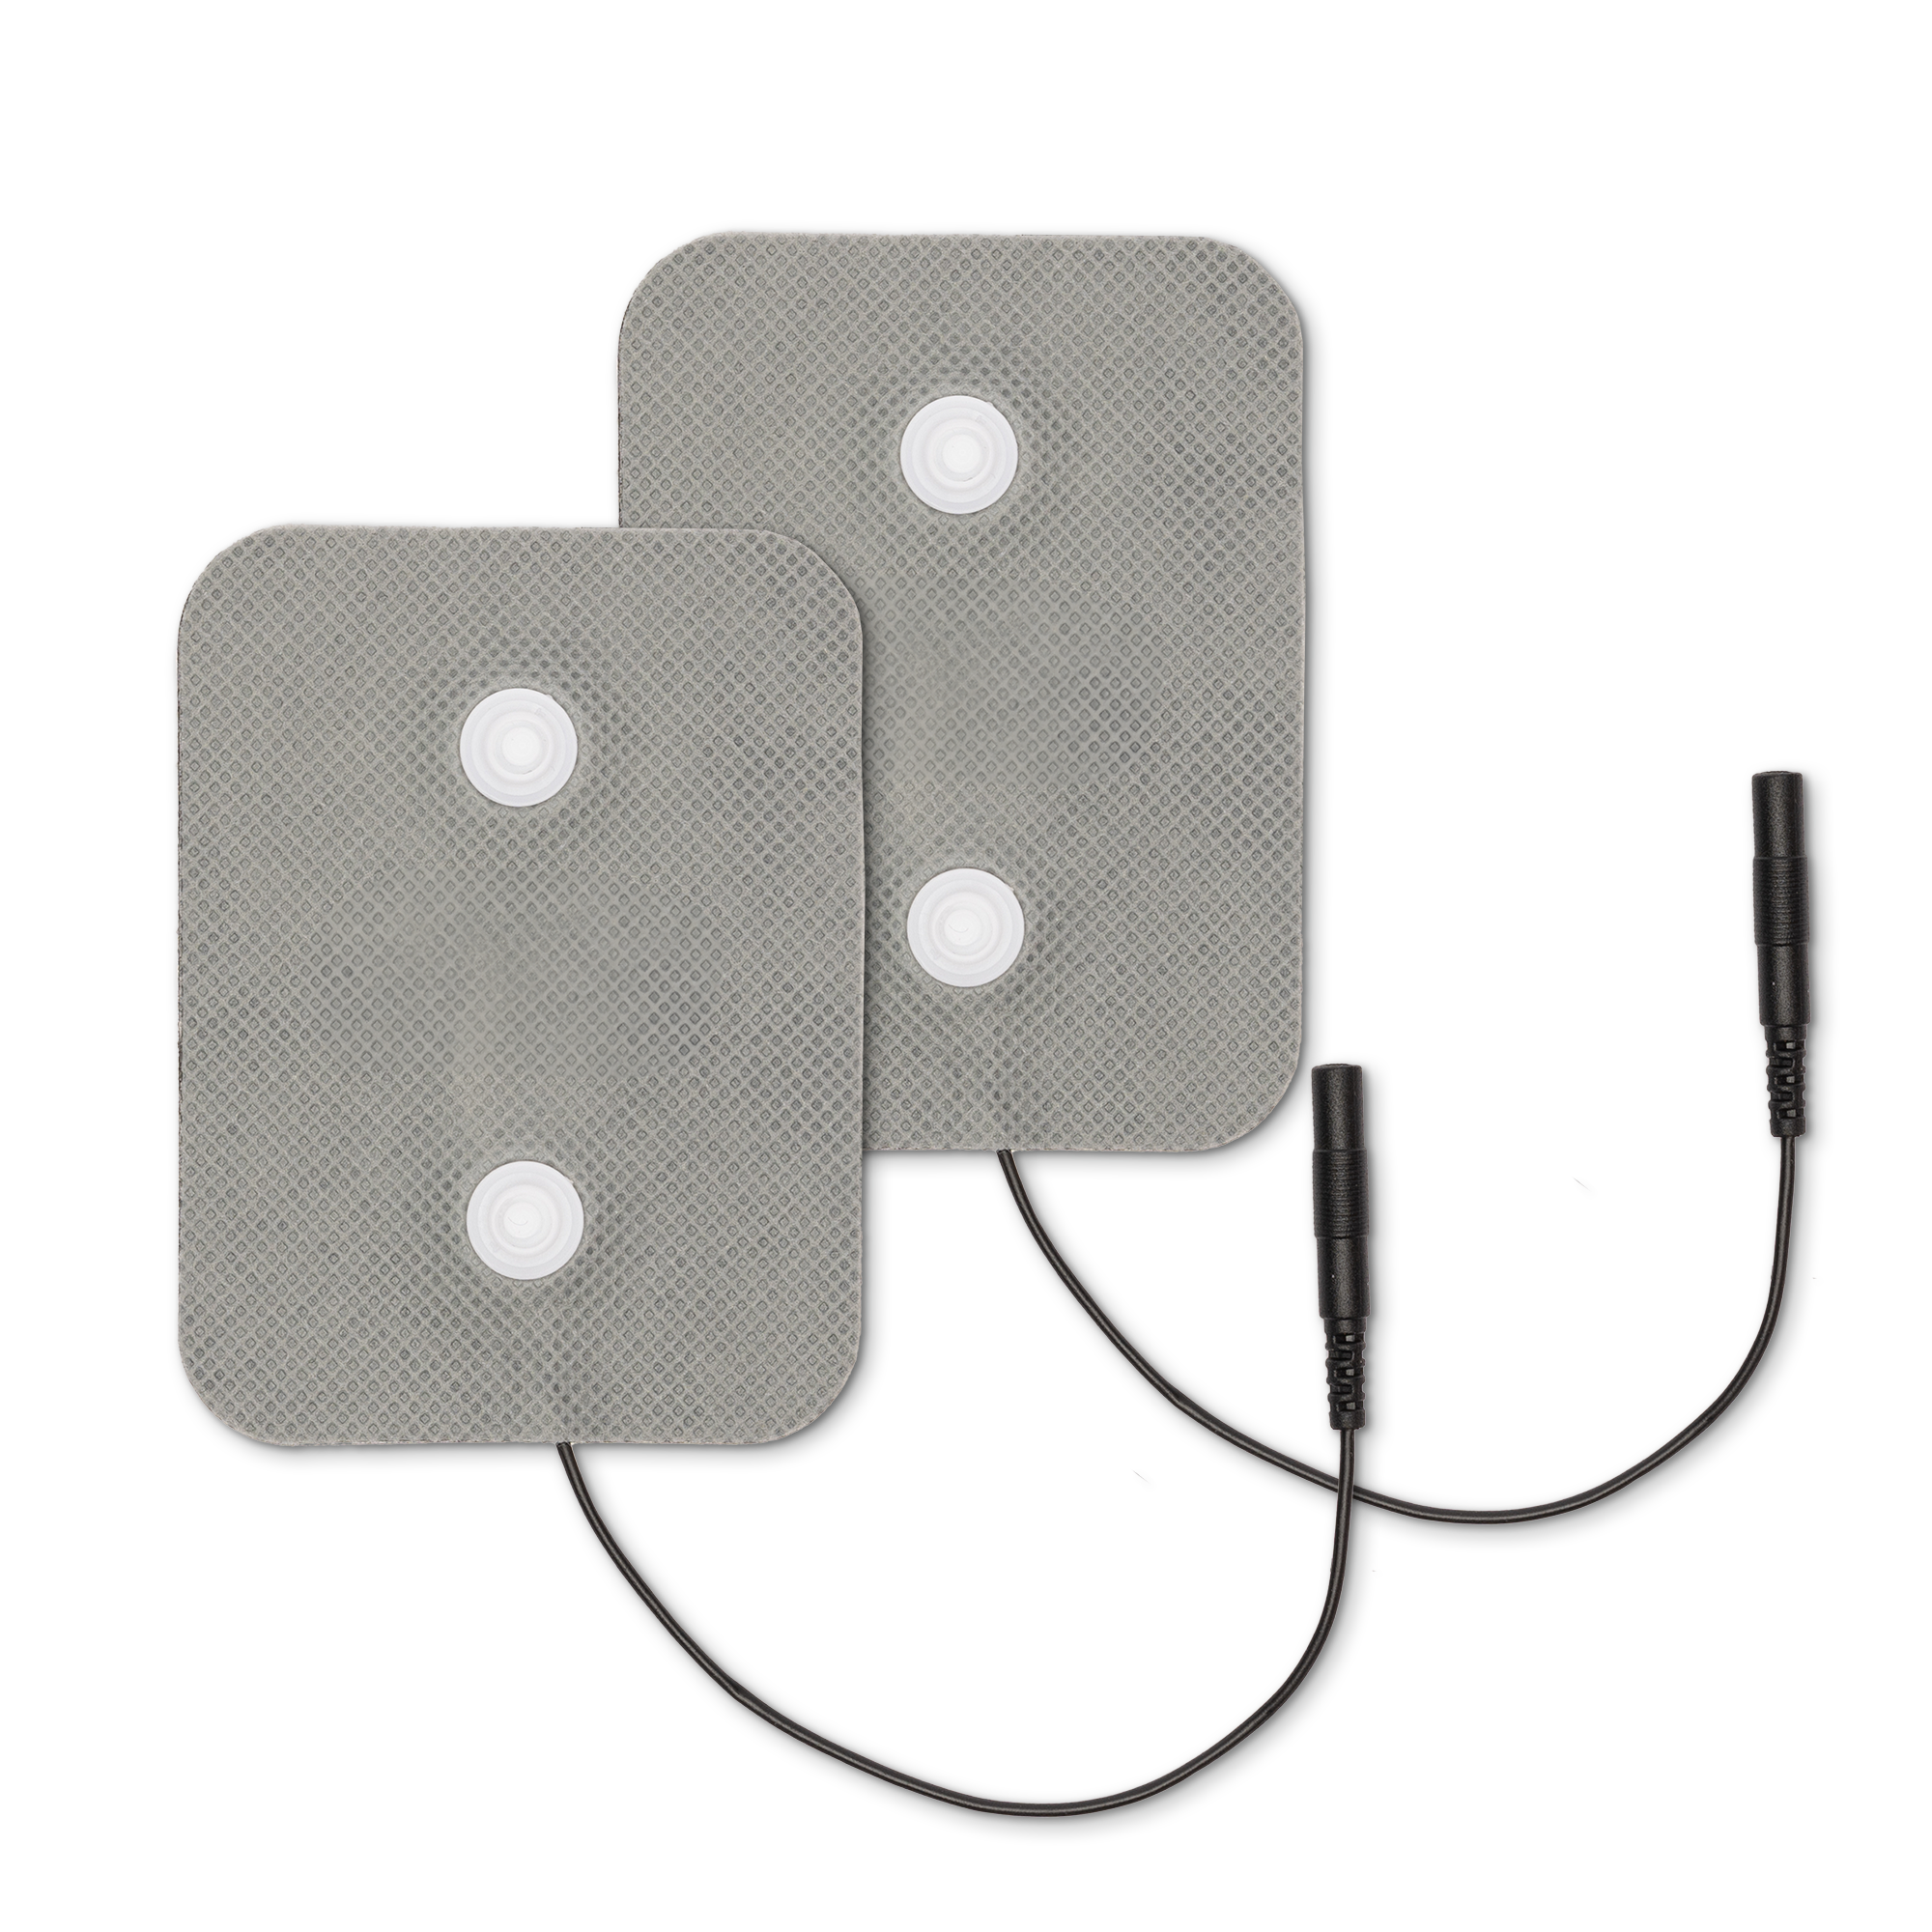 Therapy & Support Band Replacement Pads (One Pair)